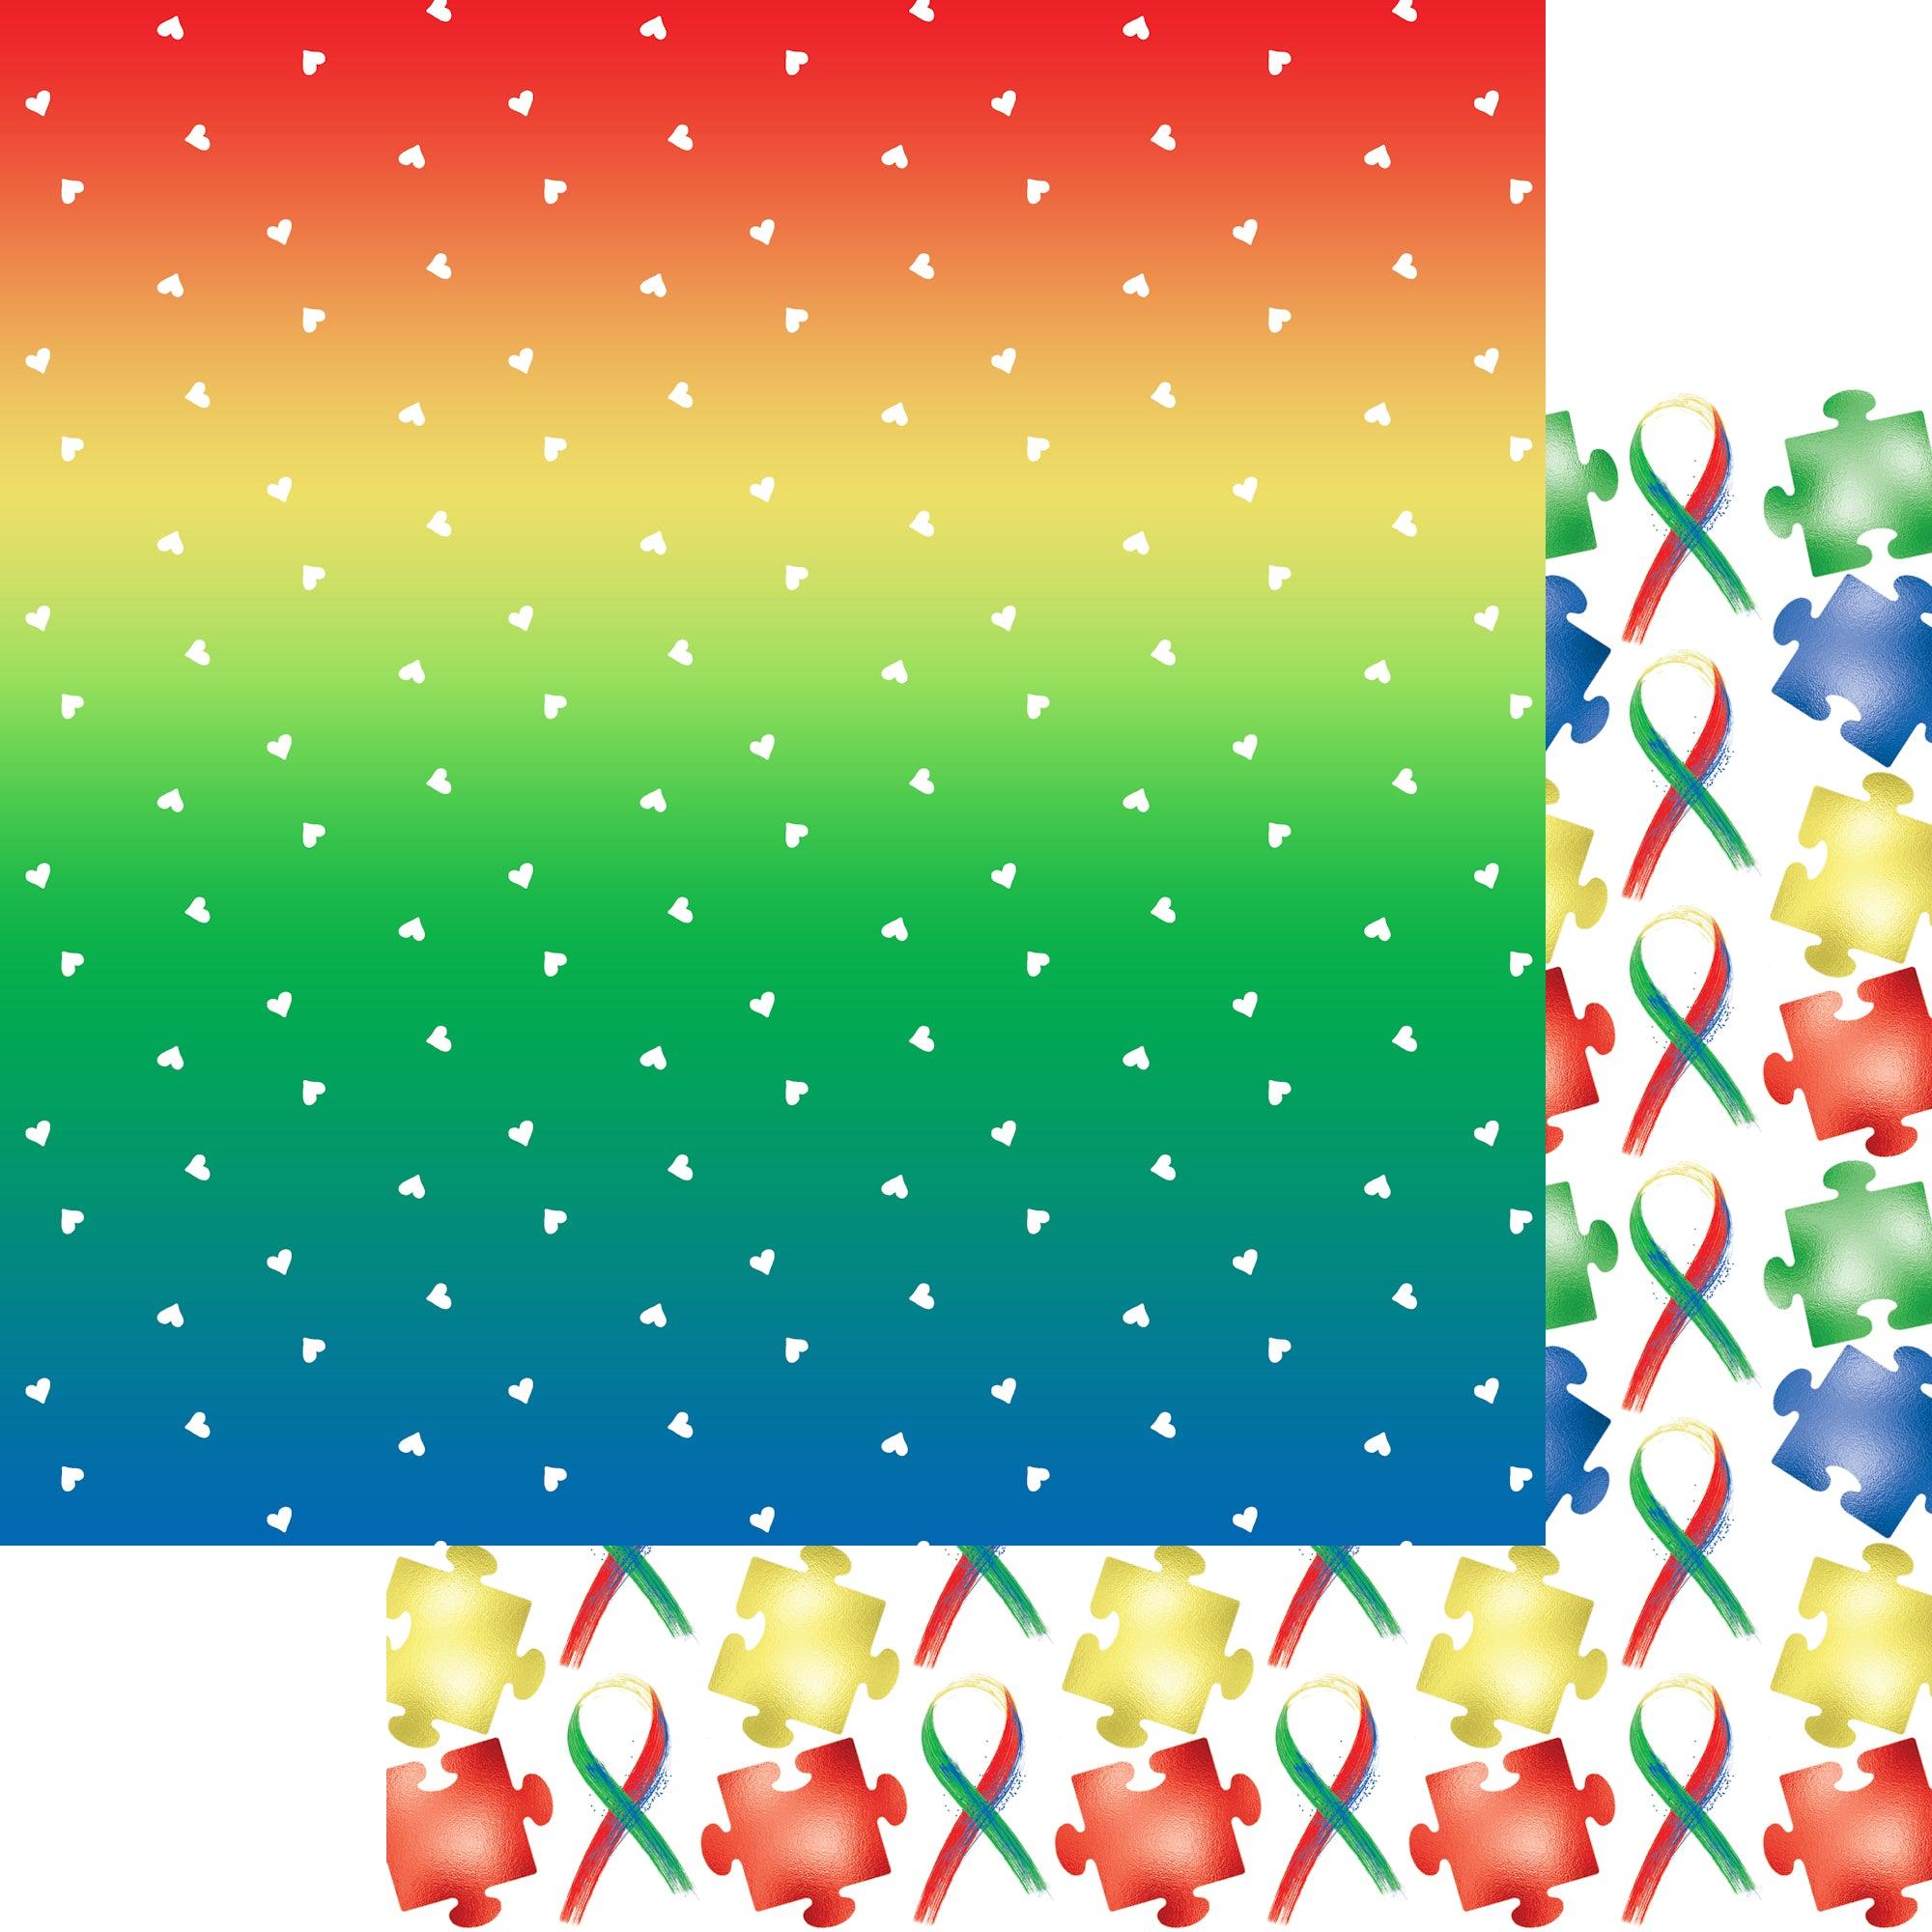 Autism Au-some Collection Rainbow Spectrum 12 x 12 Double-Sided Scrapbook Paper by SSC Designs - Scrapbook Supply Companies